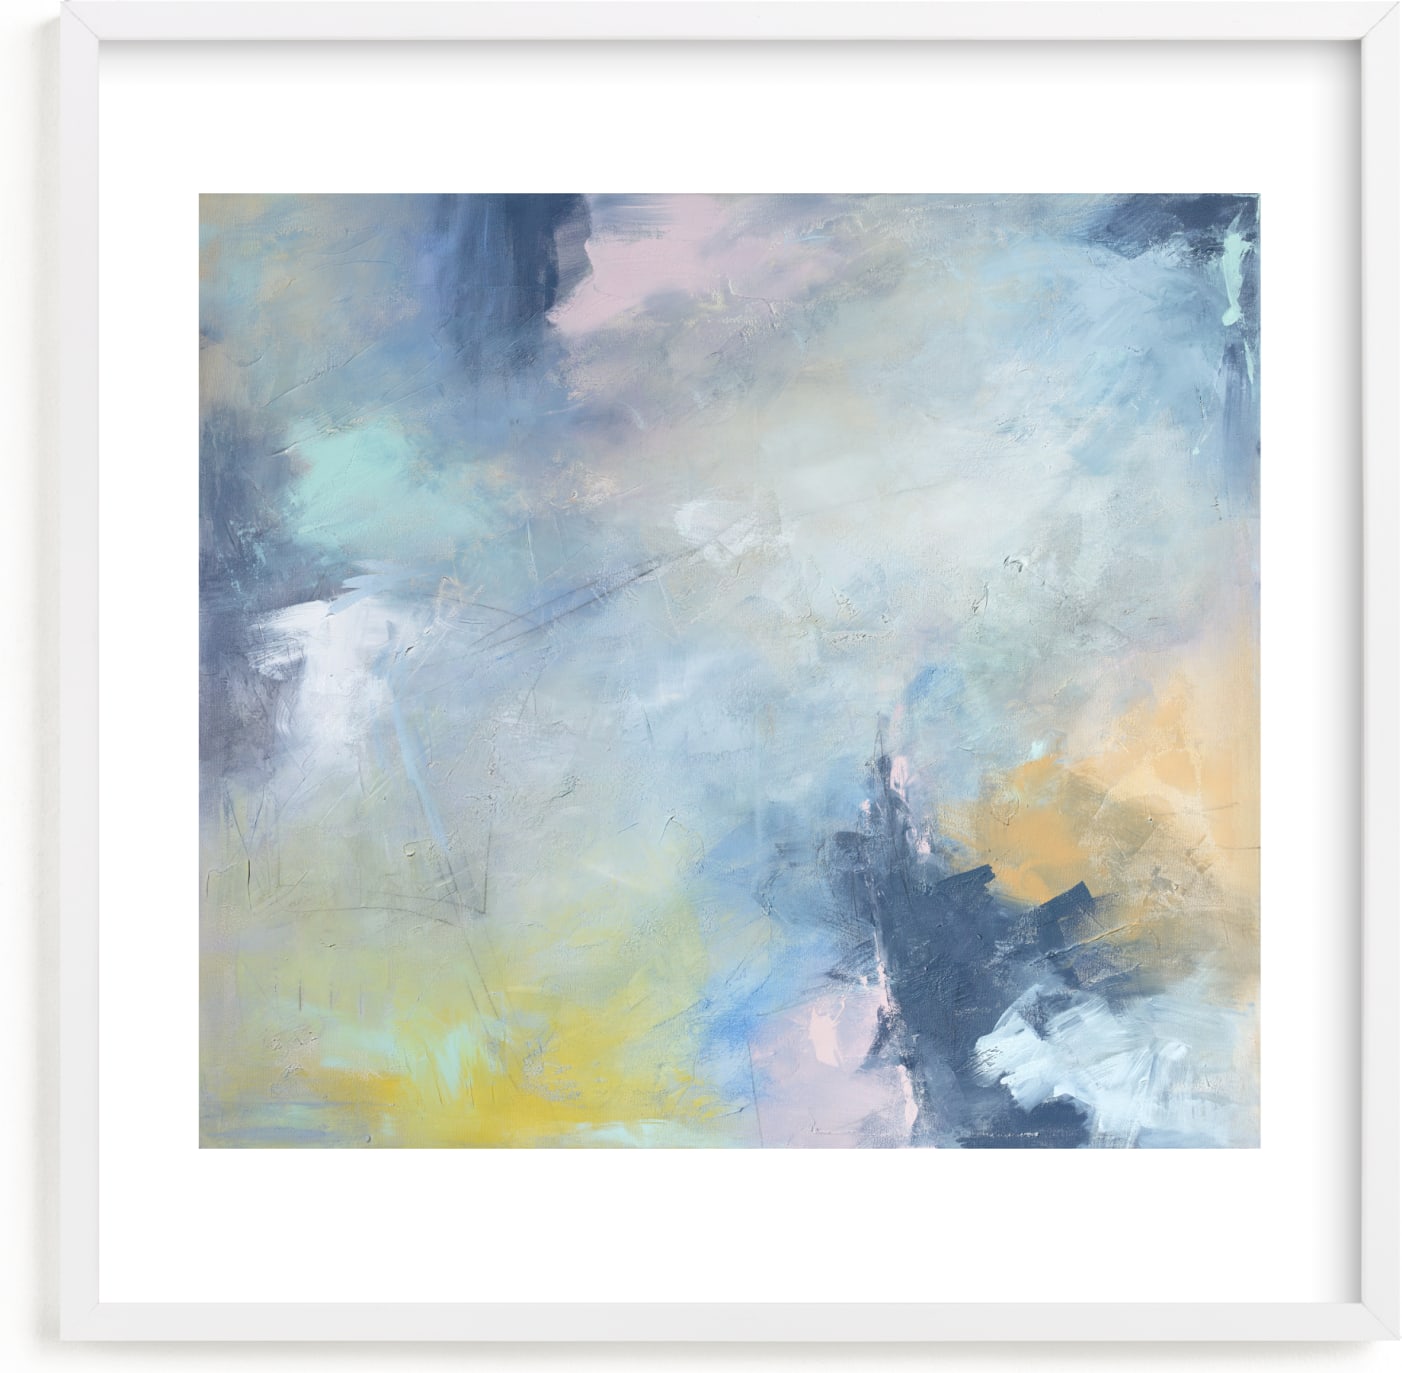 This is a blue, colorful nursery wall art by Julia Contacessi called Blissful Escape No. 1.